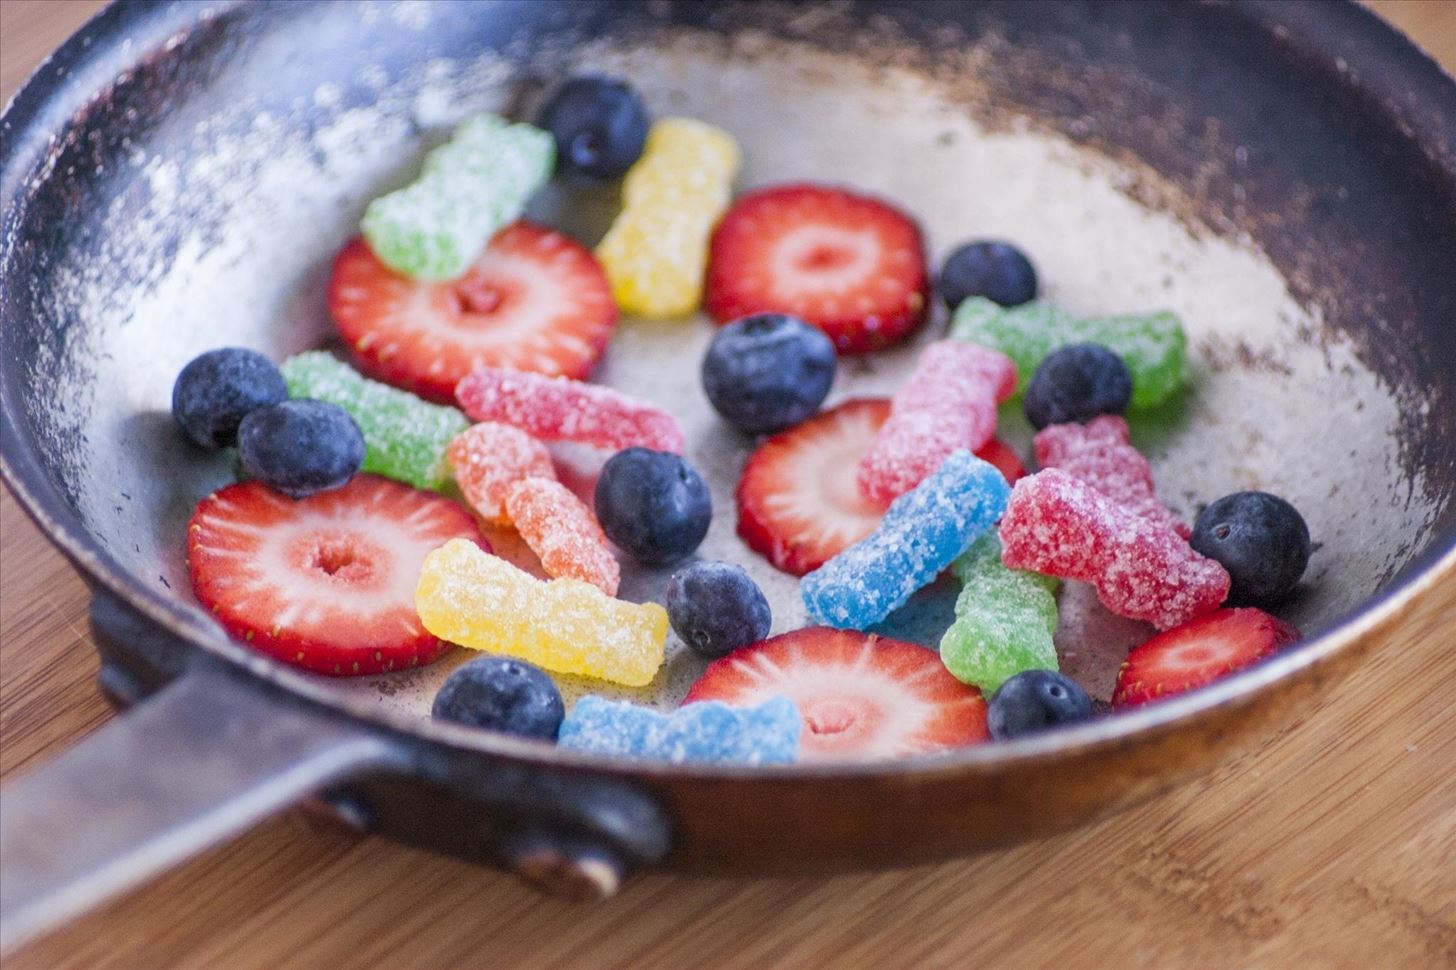 Sour Patch Recipes Your Kids'll Go Crazy For